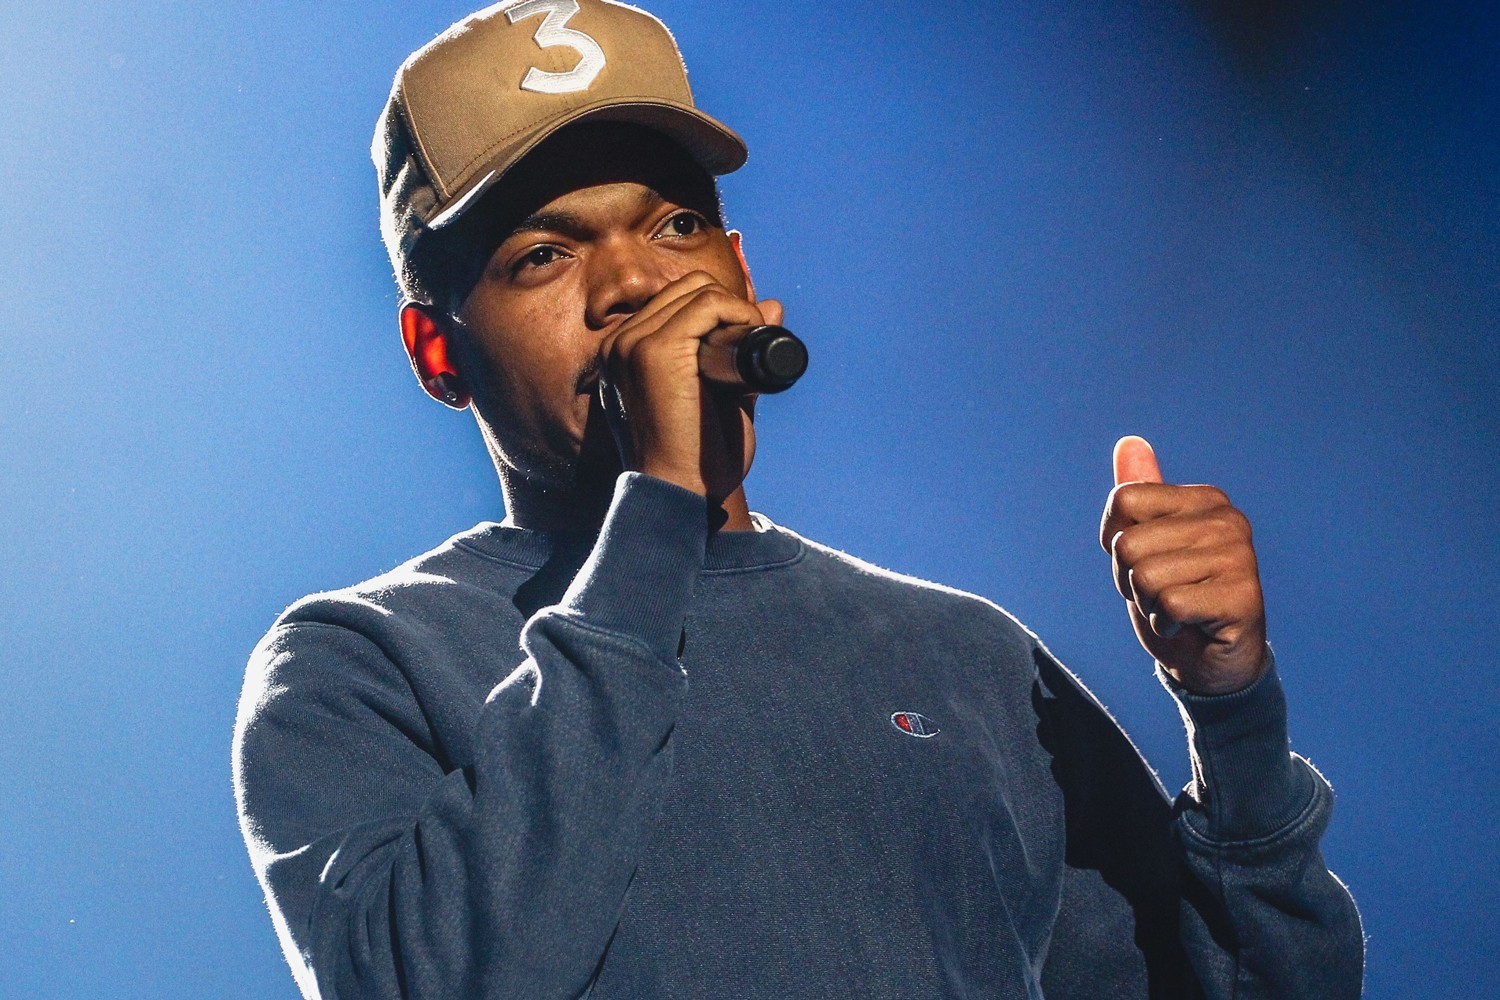 Watch Chance The Rapper Perform “I Got You” on Jimmy Kimmel Live